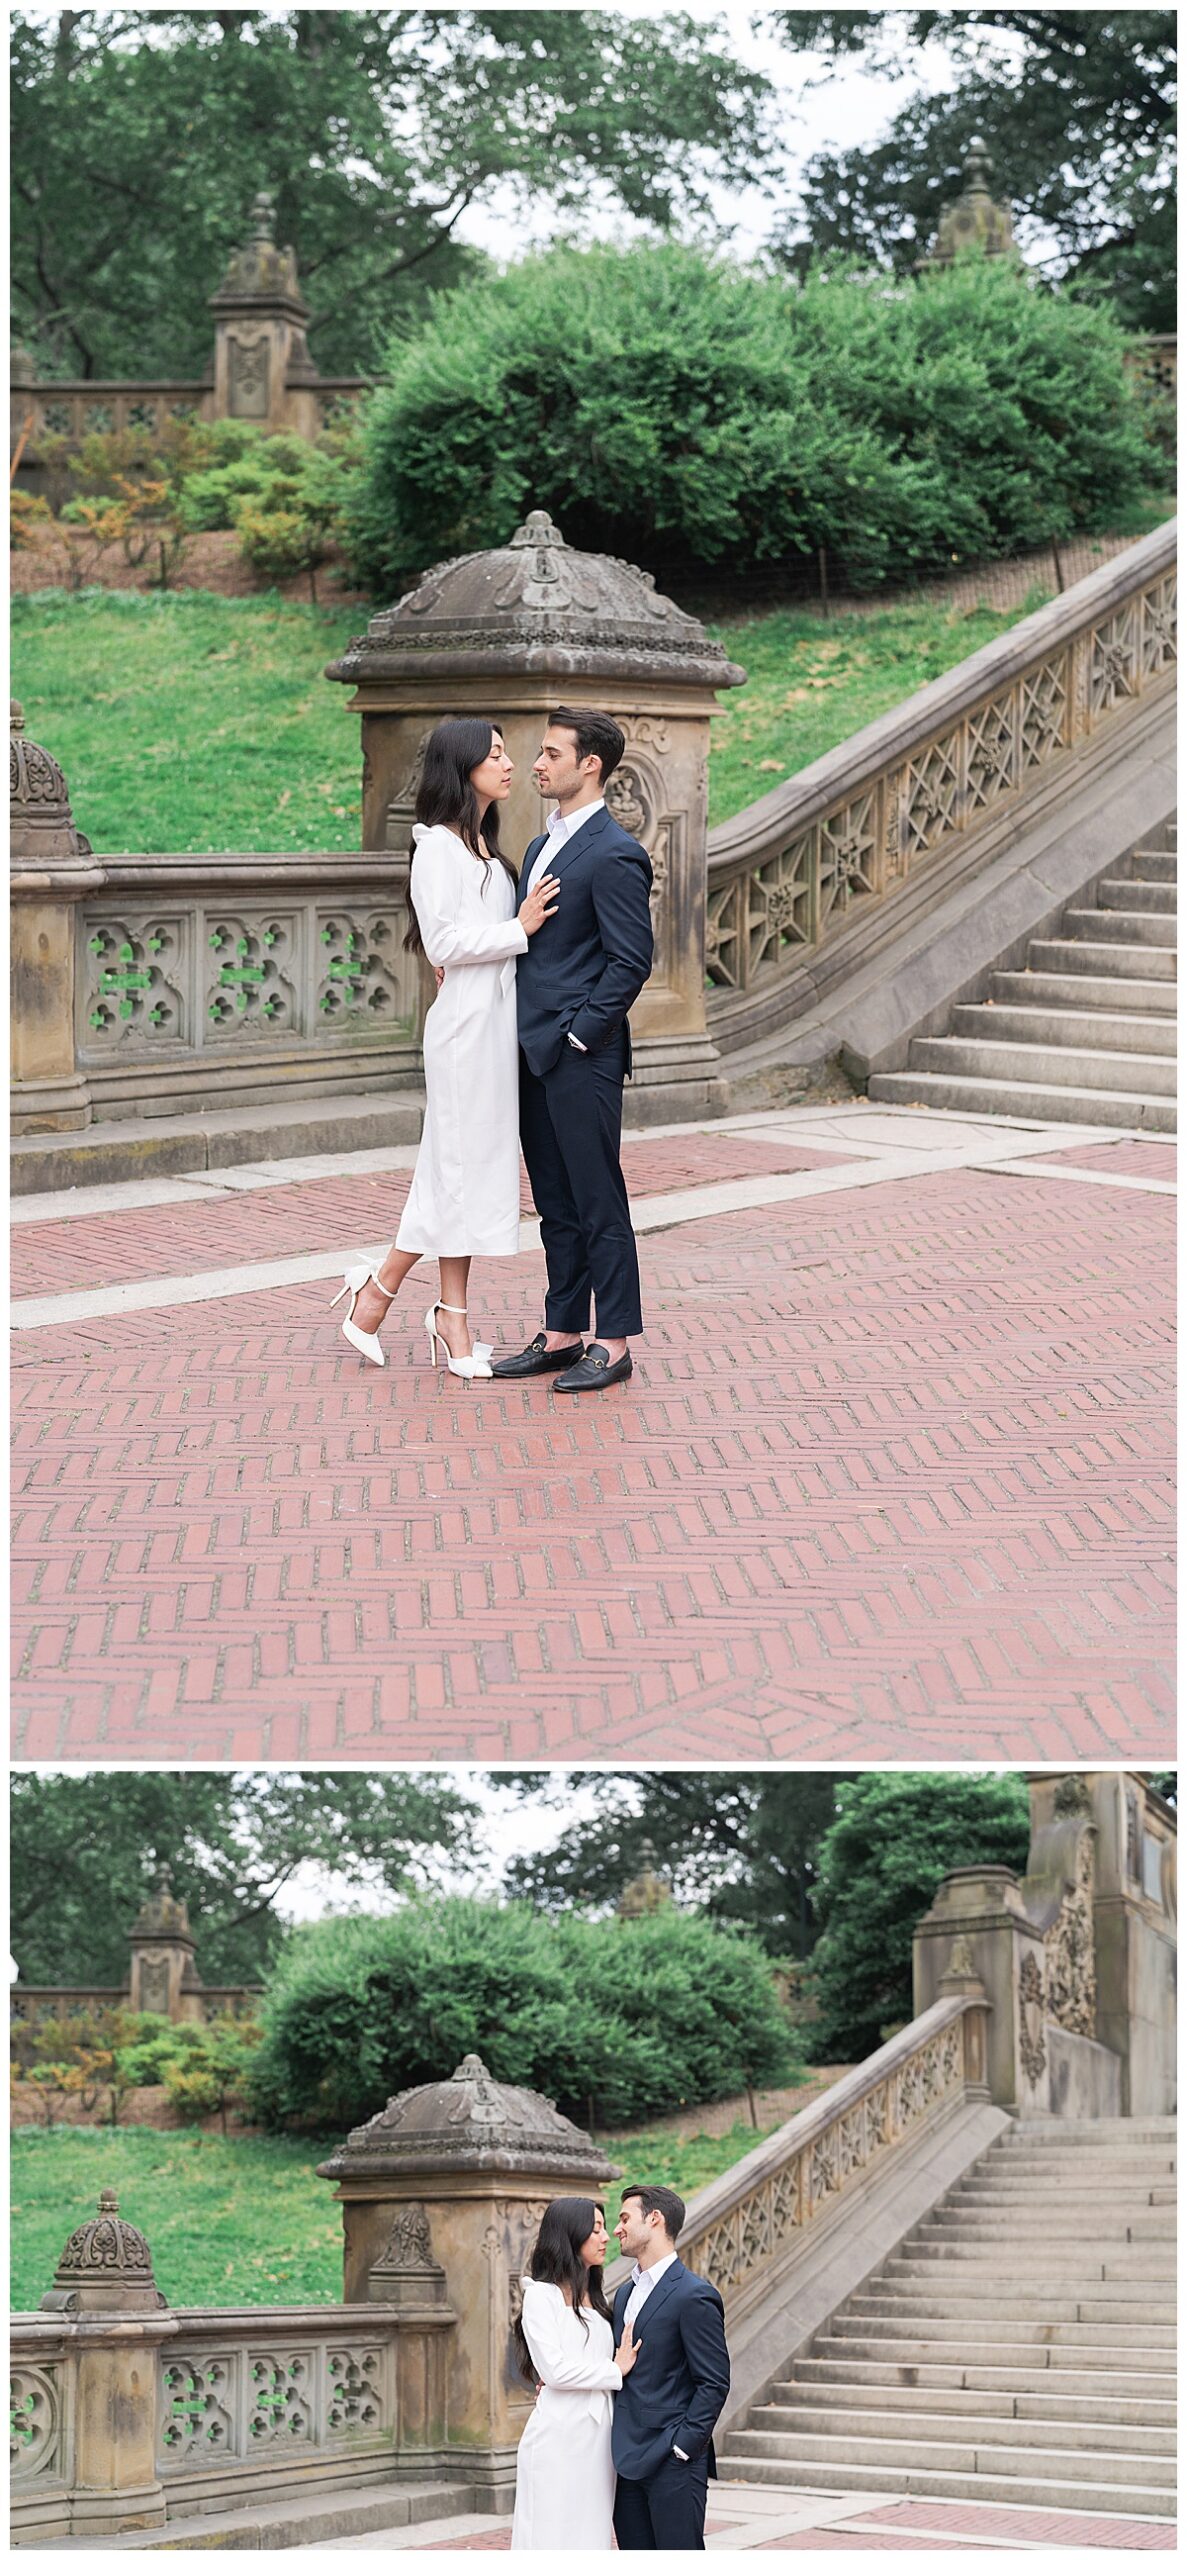 Man and woman stand close together during their Destination Engagement Session